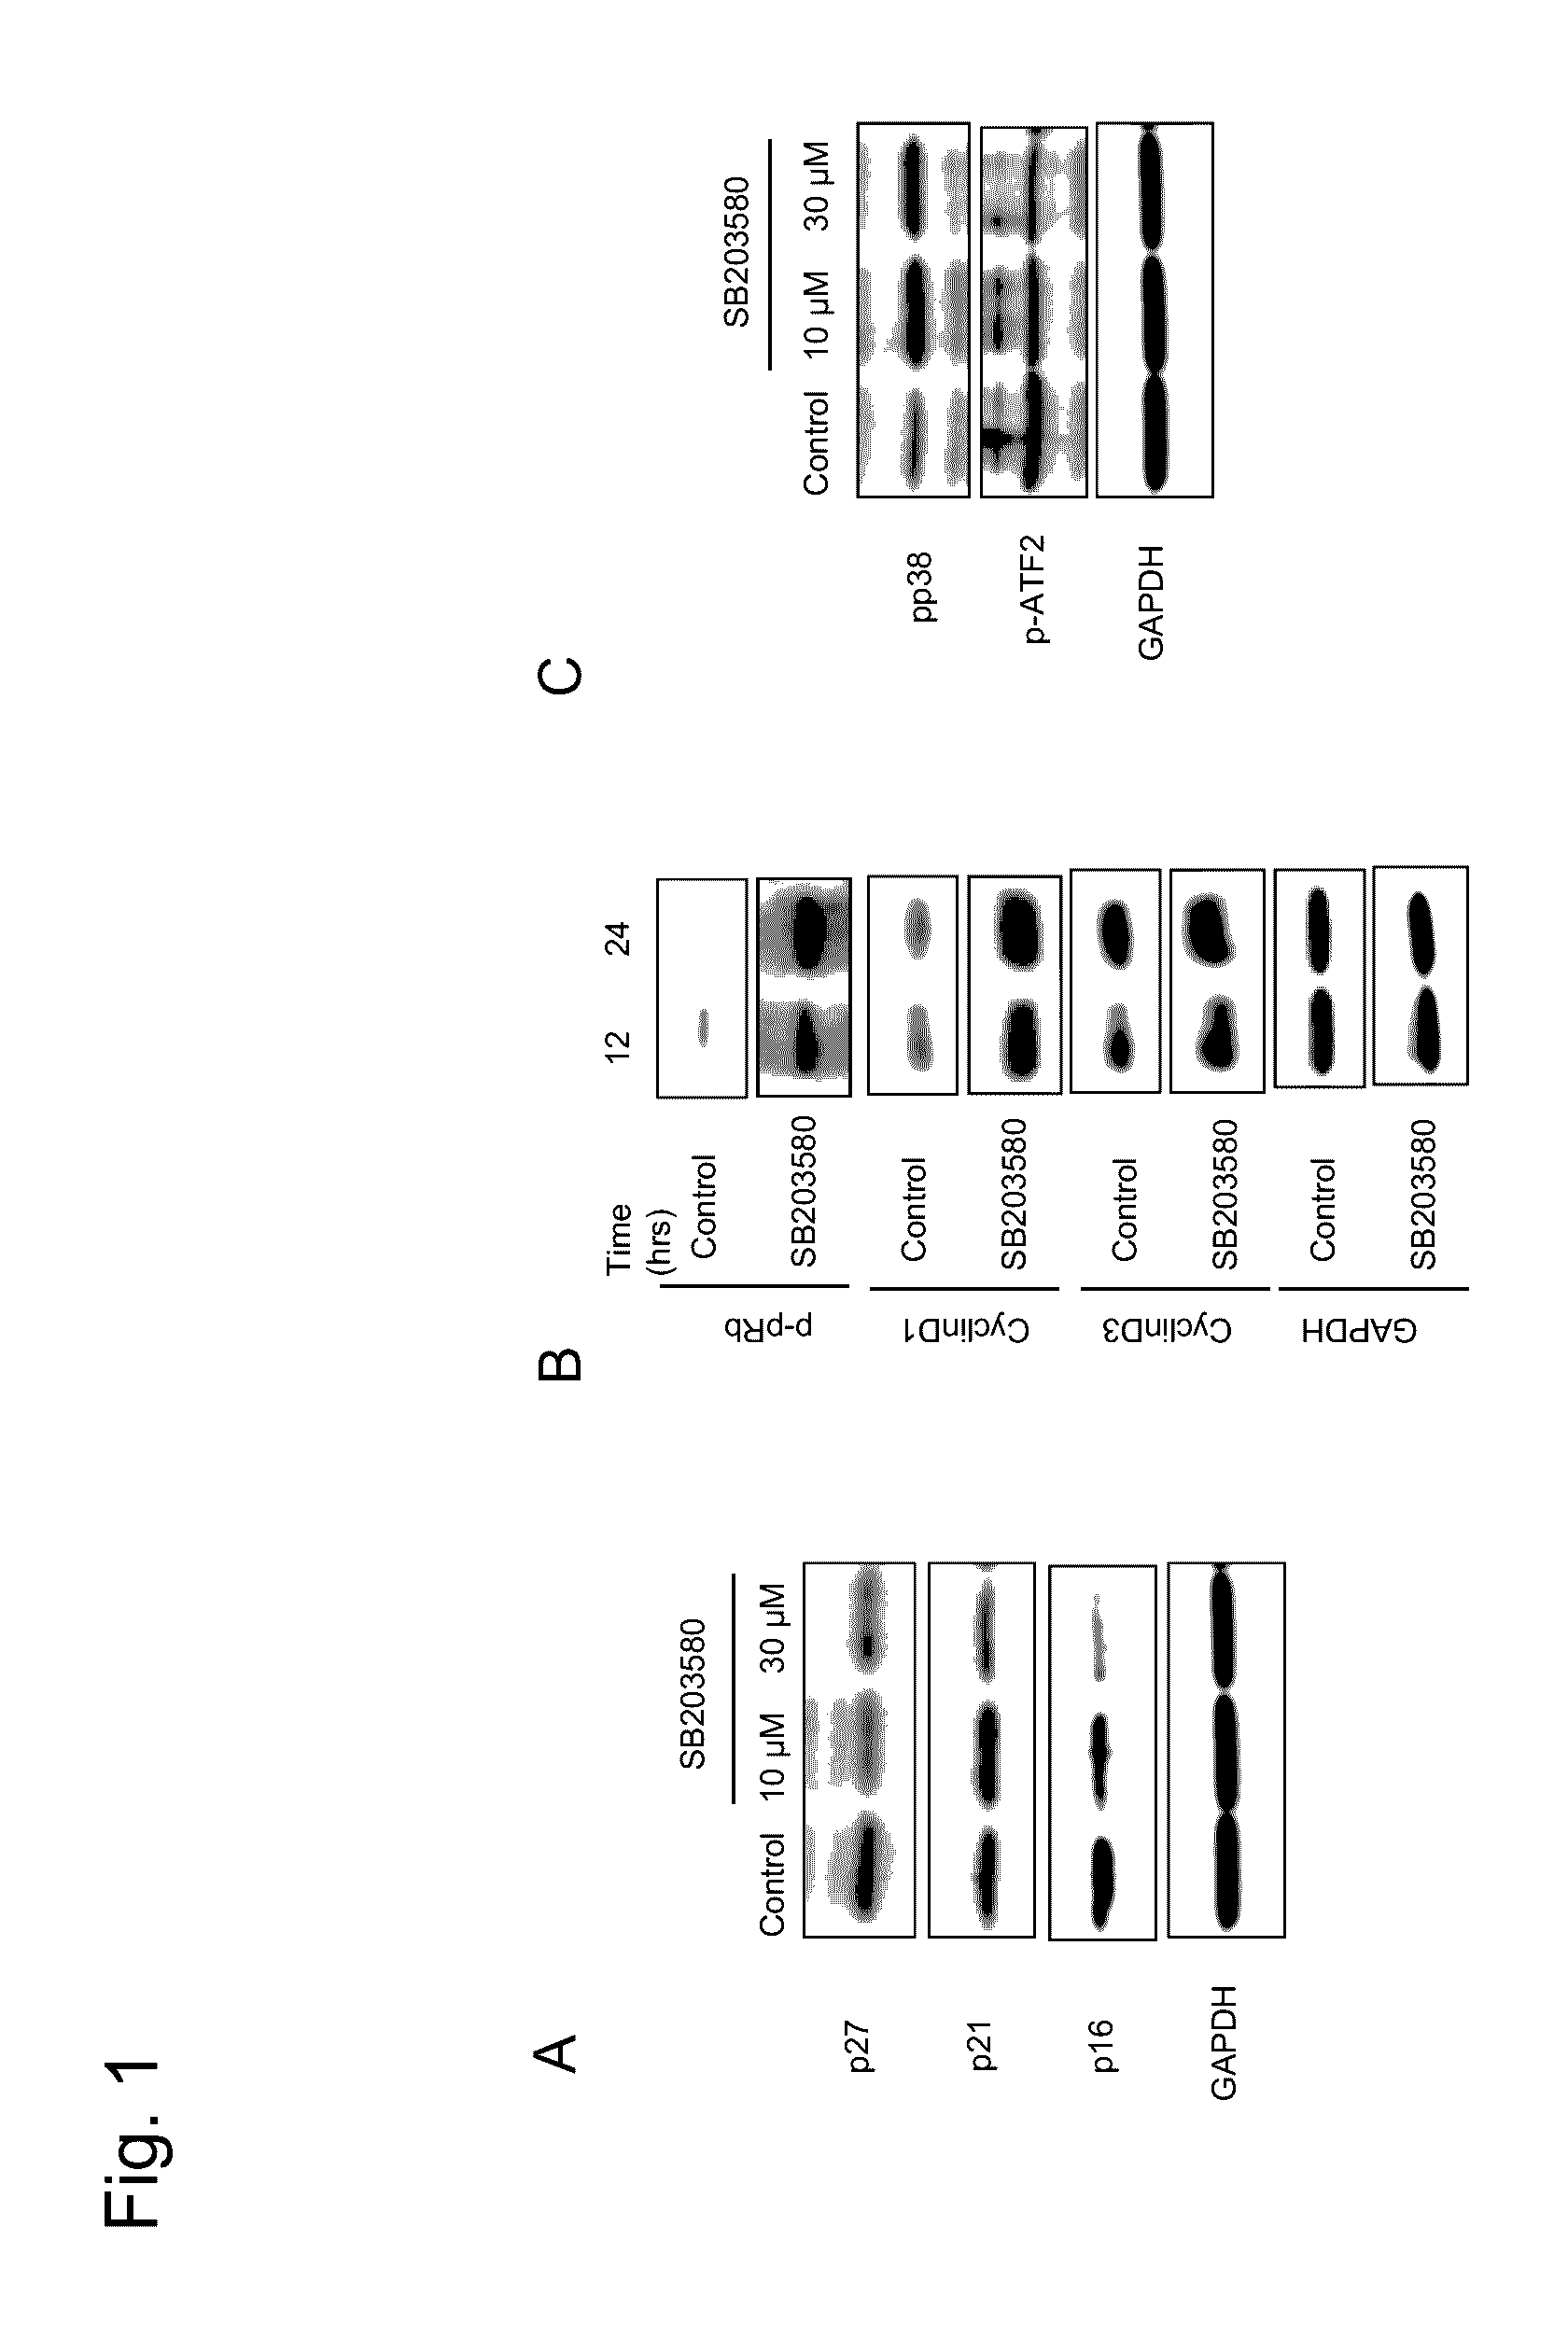 Drug for treating corneal endothelium by promoting cell proliferation or inhibiting cell damage